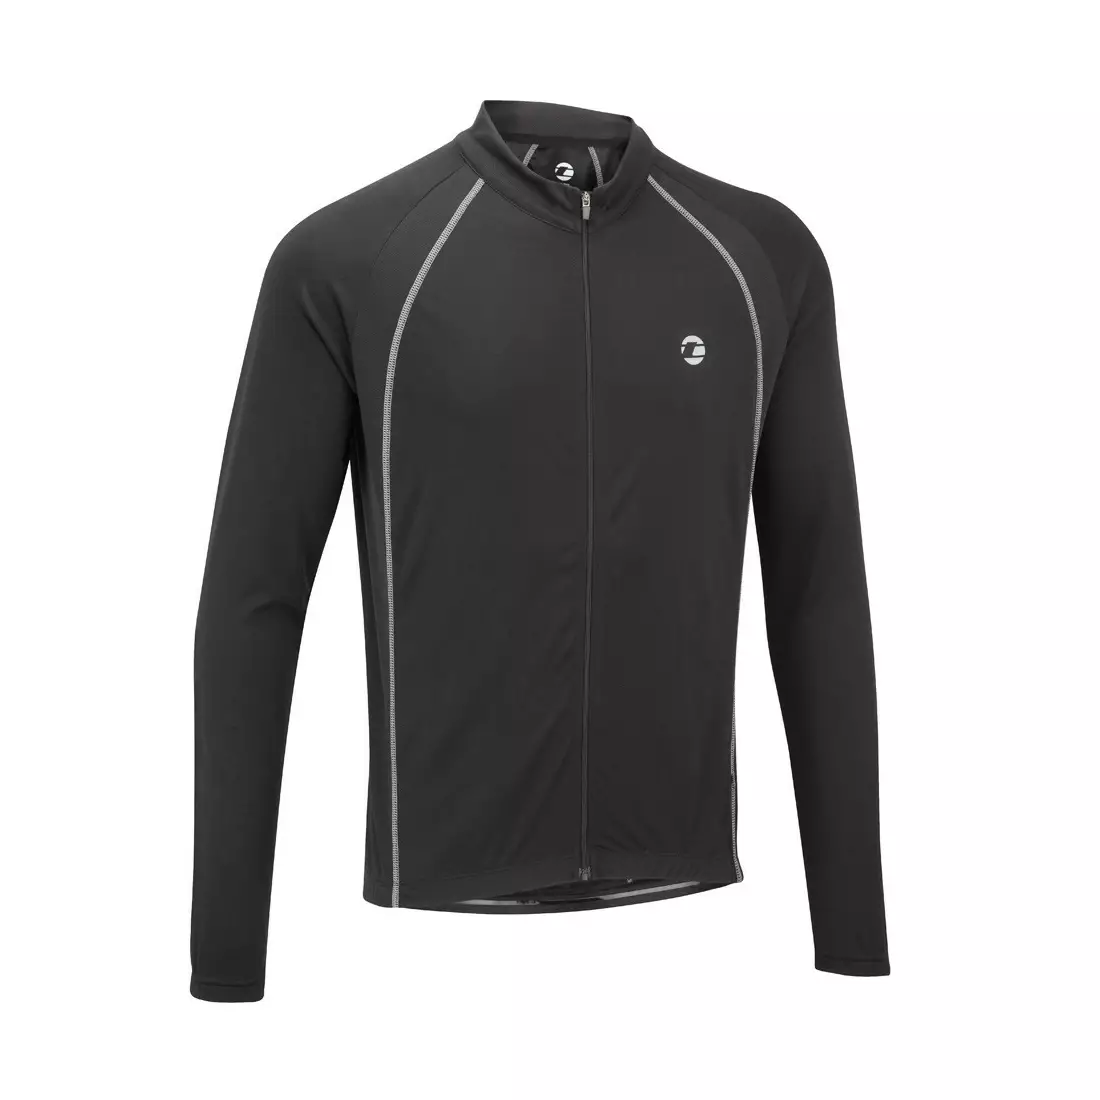 TENN OUTDOORS Men's Sprint cycling jersey with long sleeves, black